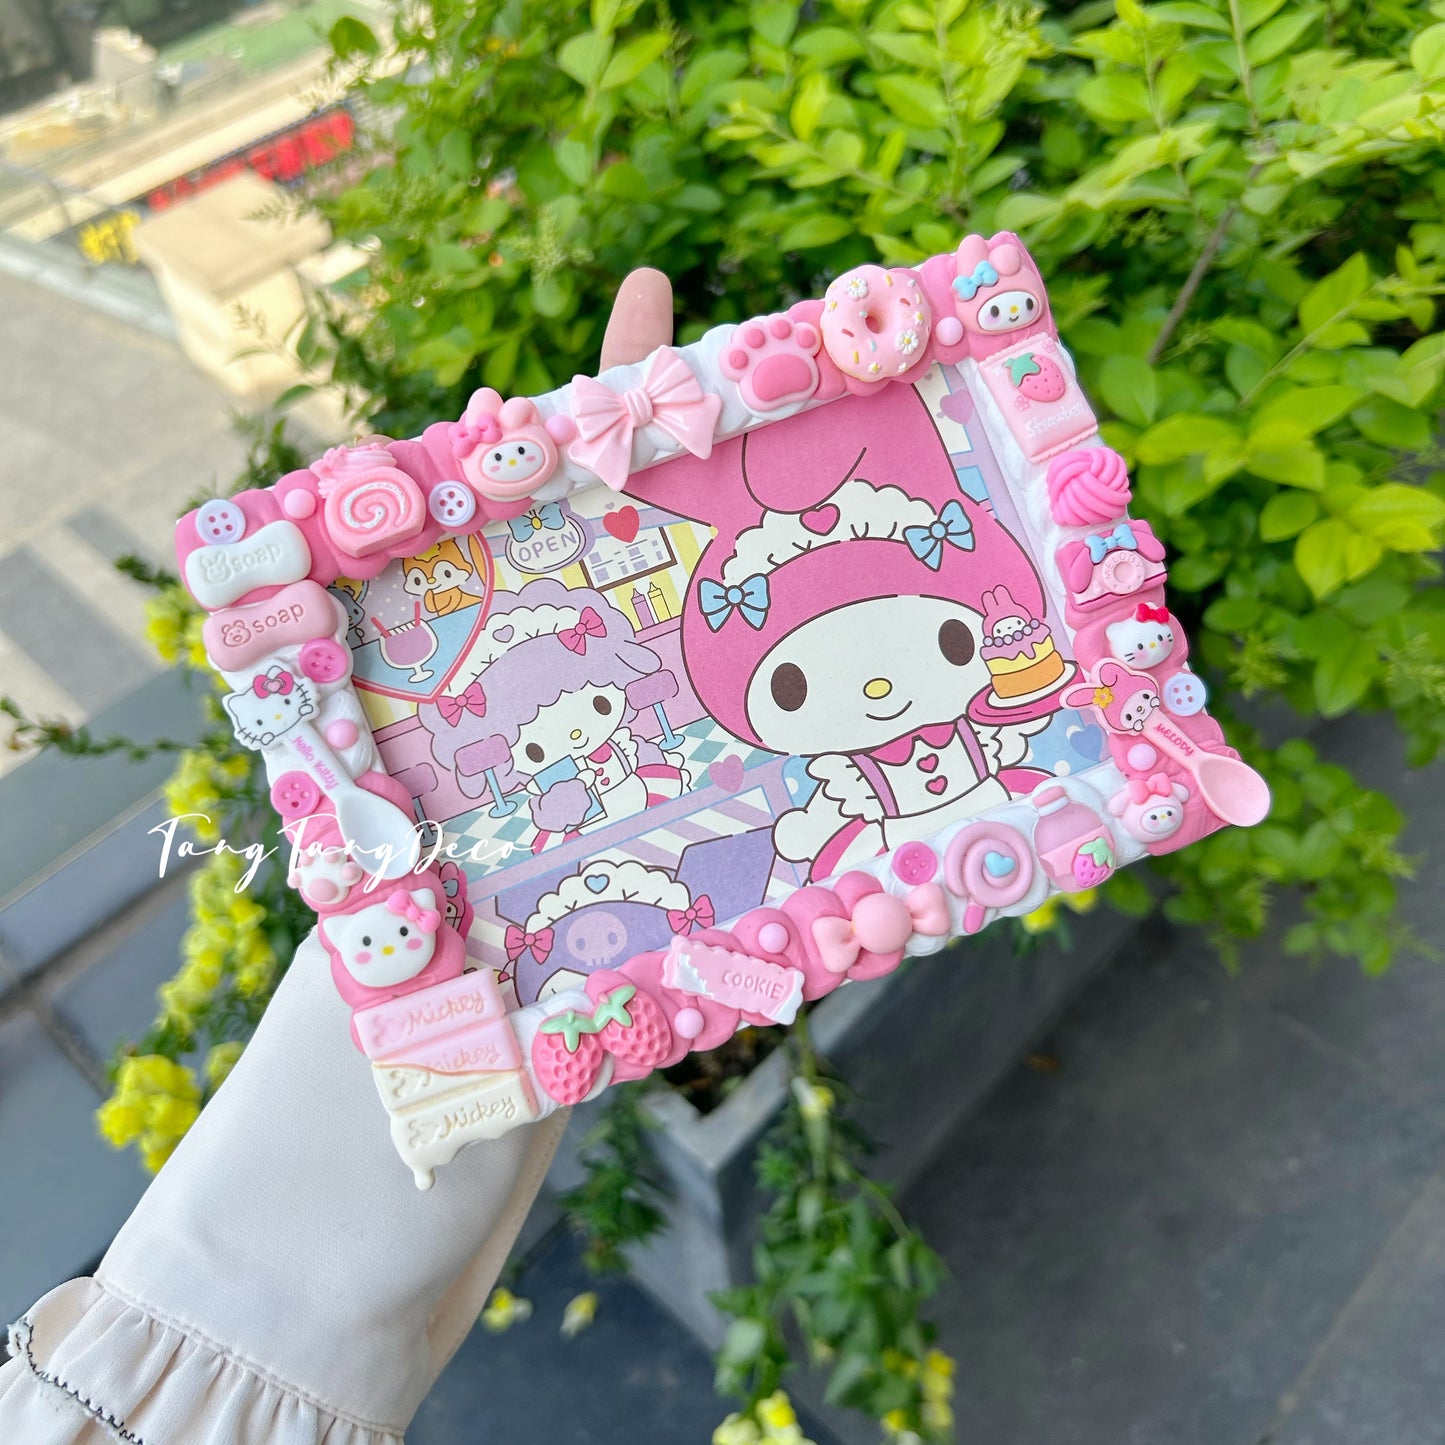 Melody and Hello Kitty picture frame